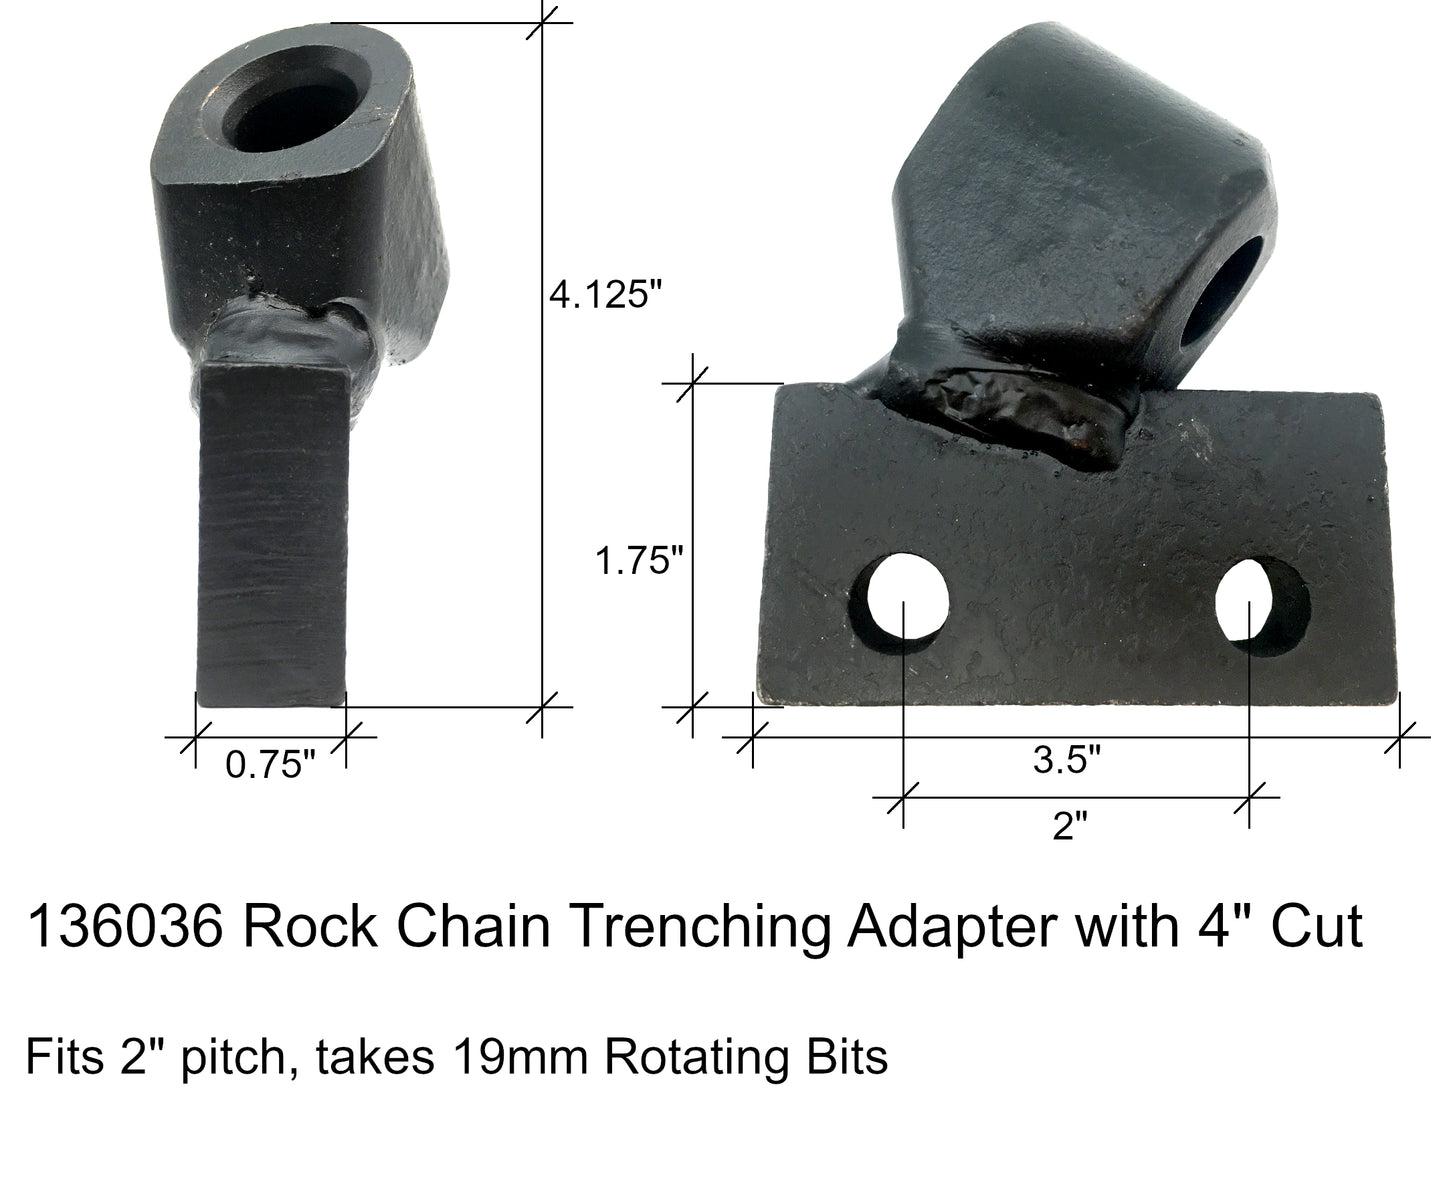 LH & RH Rock Chain Trenching Adapters - 136036 & 136037 - 2" Pitch, 4" Cut, 19mm